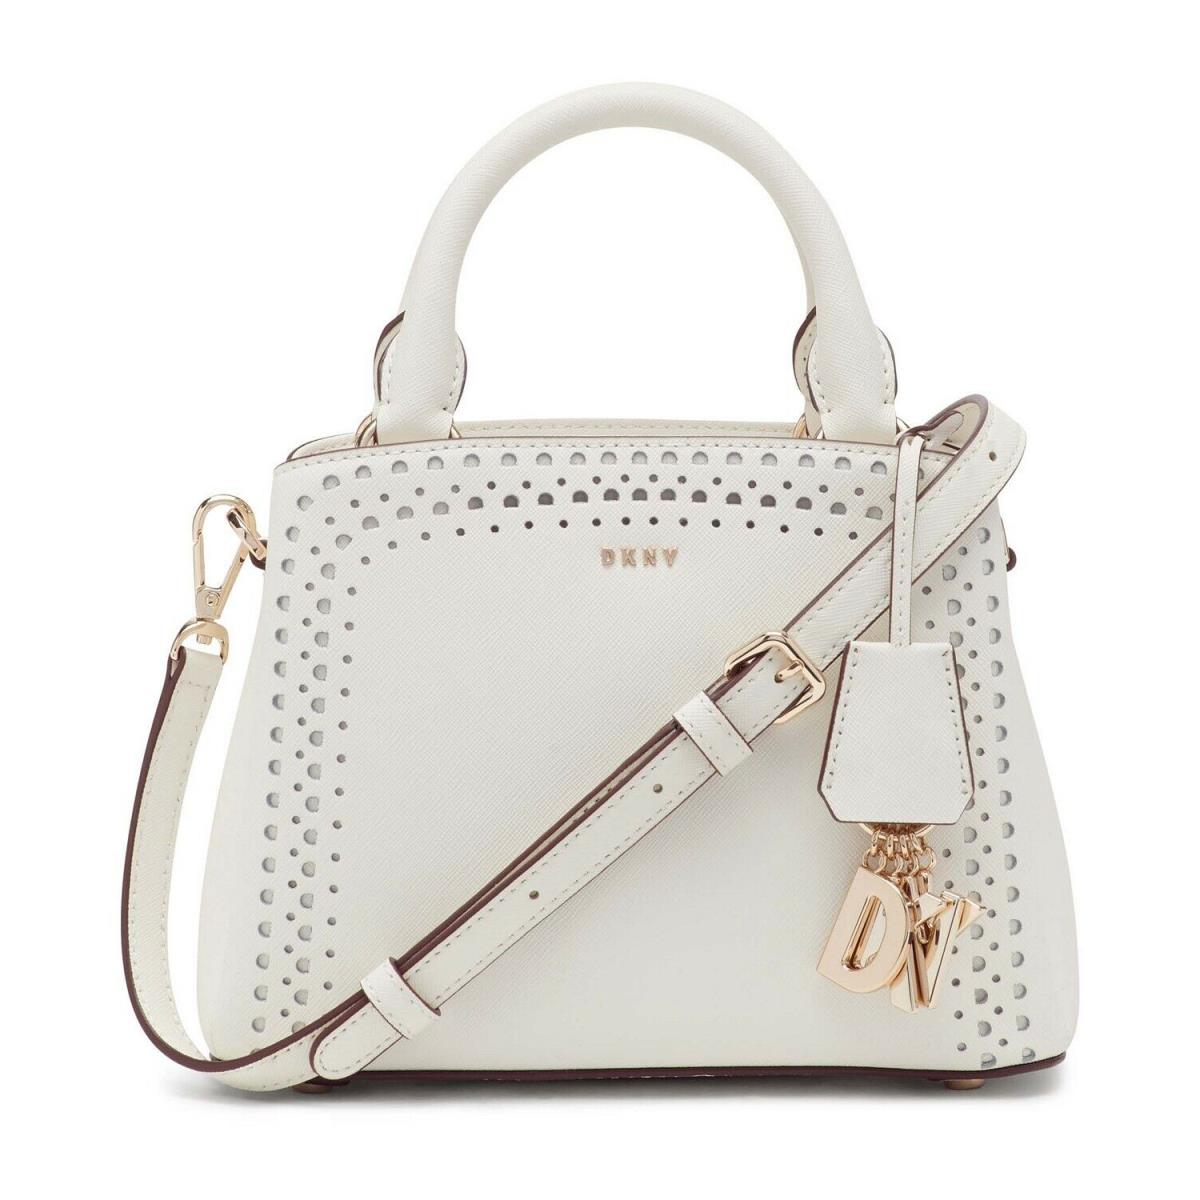 Dkny Paige Small Leather Satchel White - White Exterior